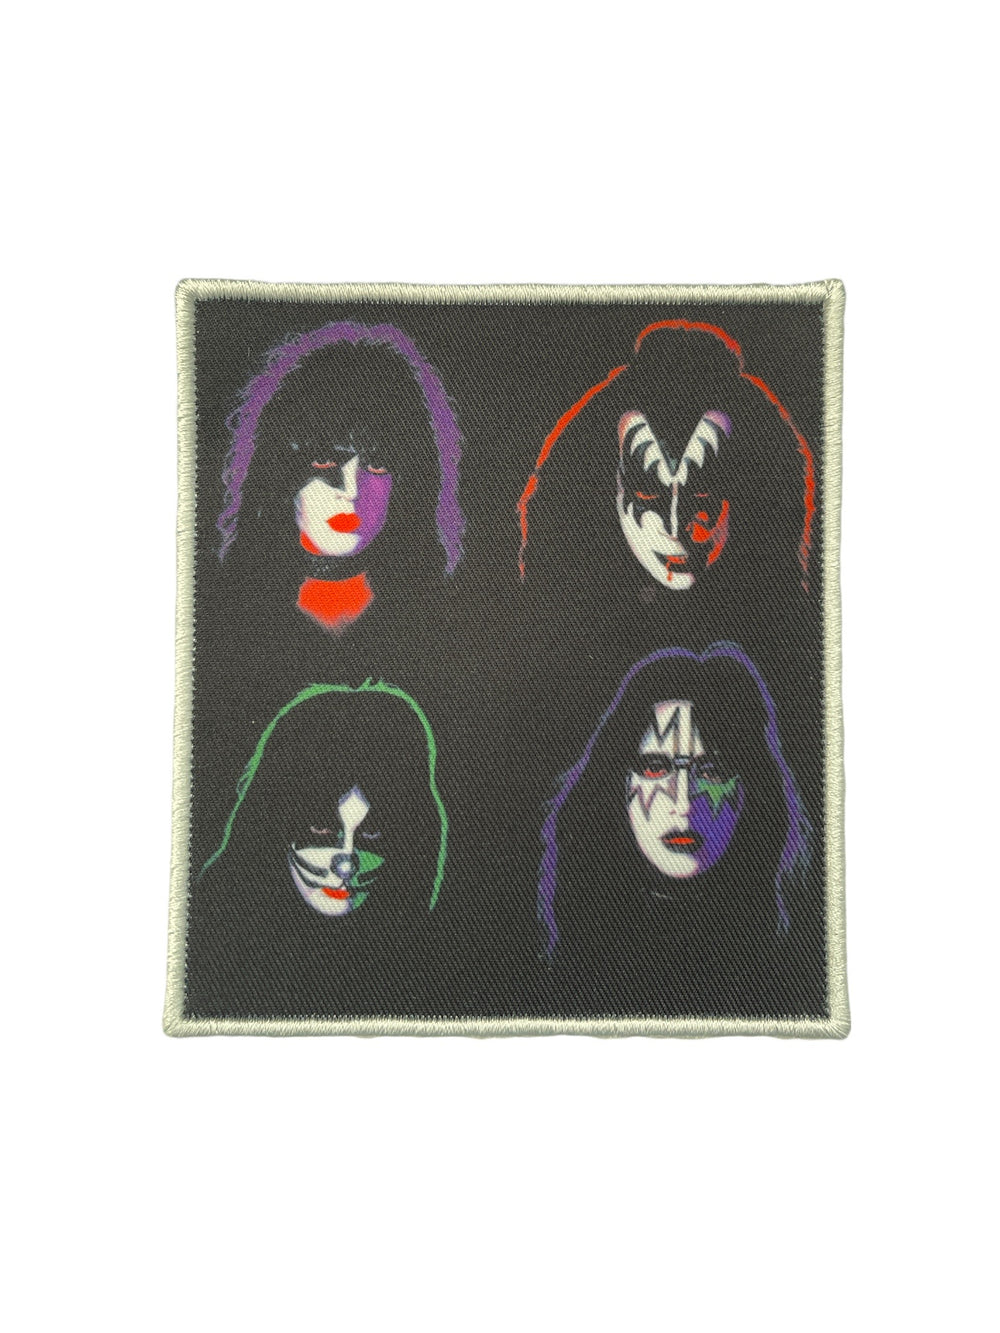 KISS Standard Patch: 4 Heads Official Woven Patch Brand New